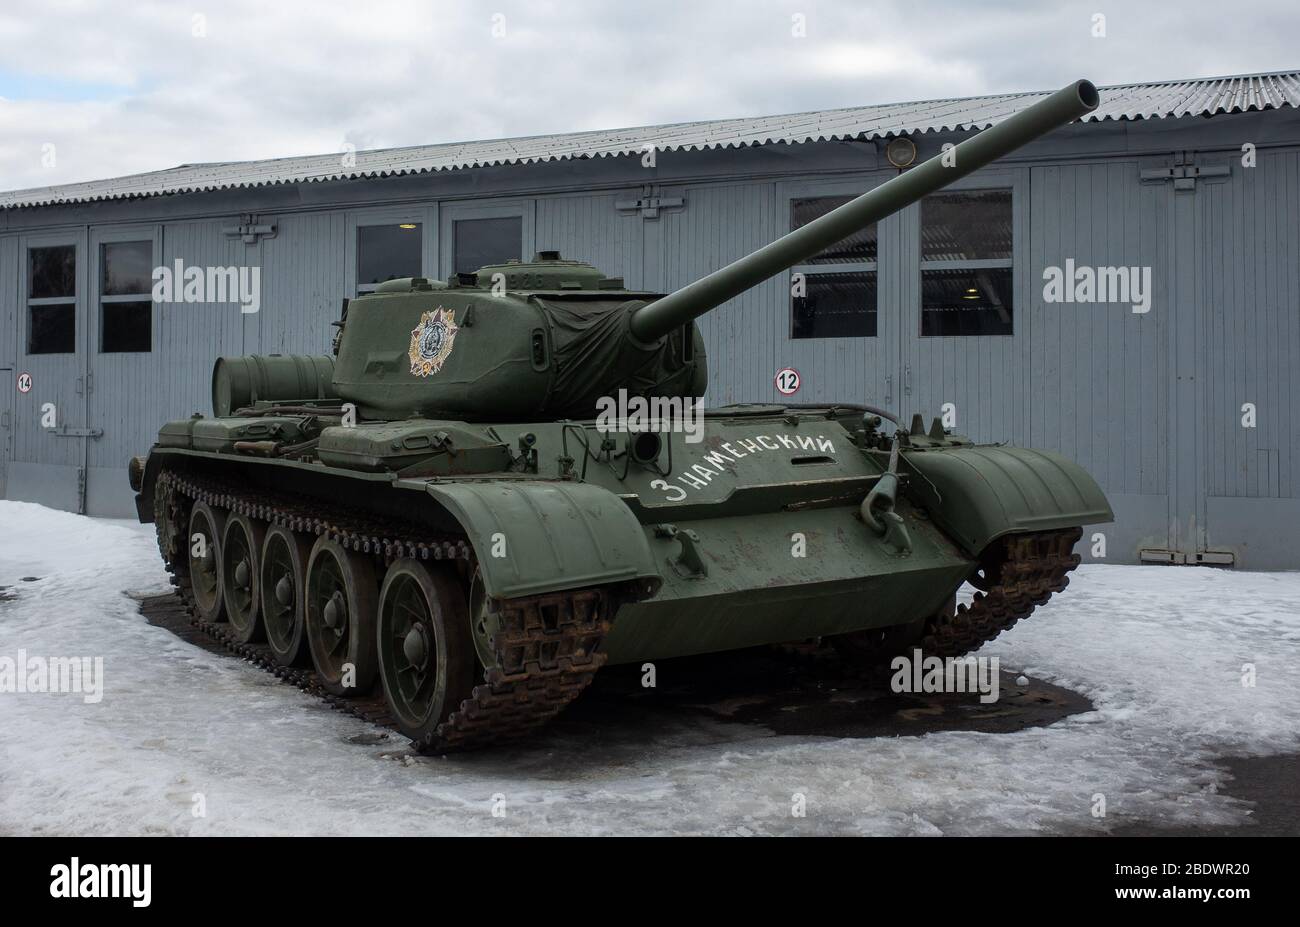 March 23, 2019 Moscow region, Russia. Soviet medium tank of the world war II period T-34-85 in the Central Museum of armored weapons and equipment in Stock Photo